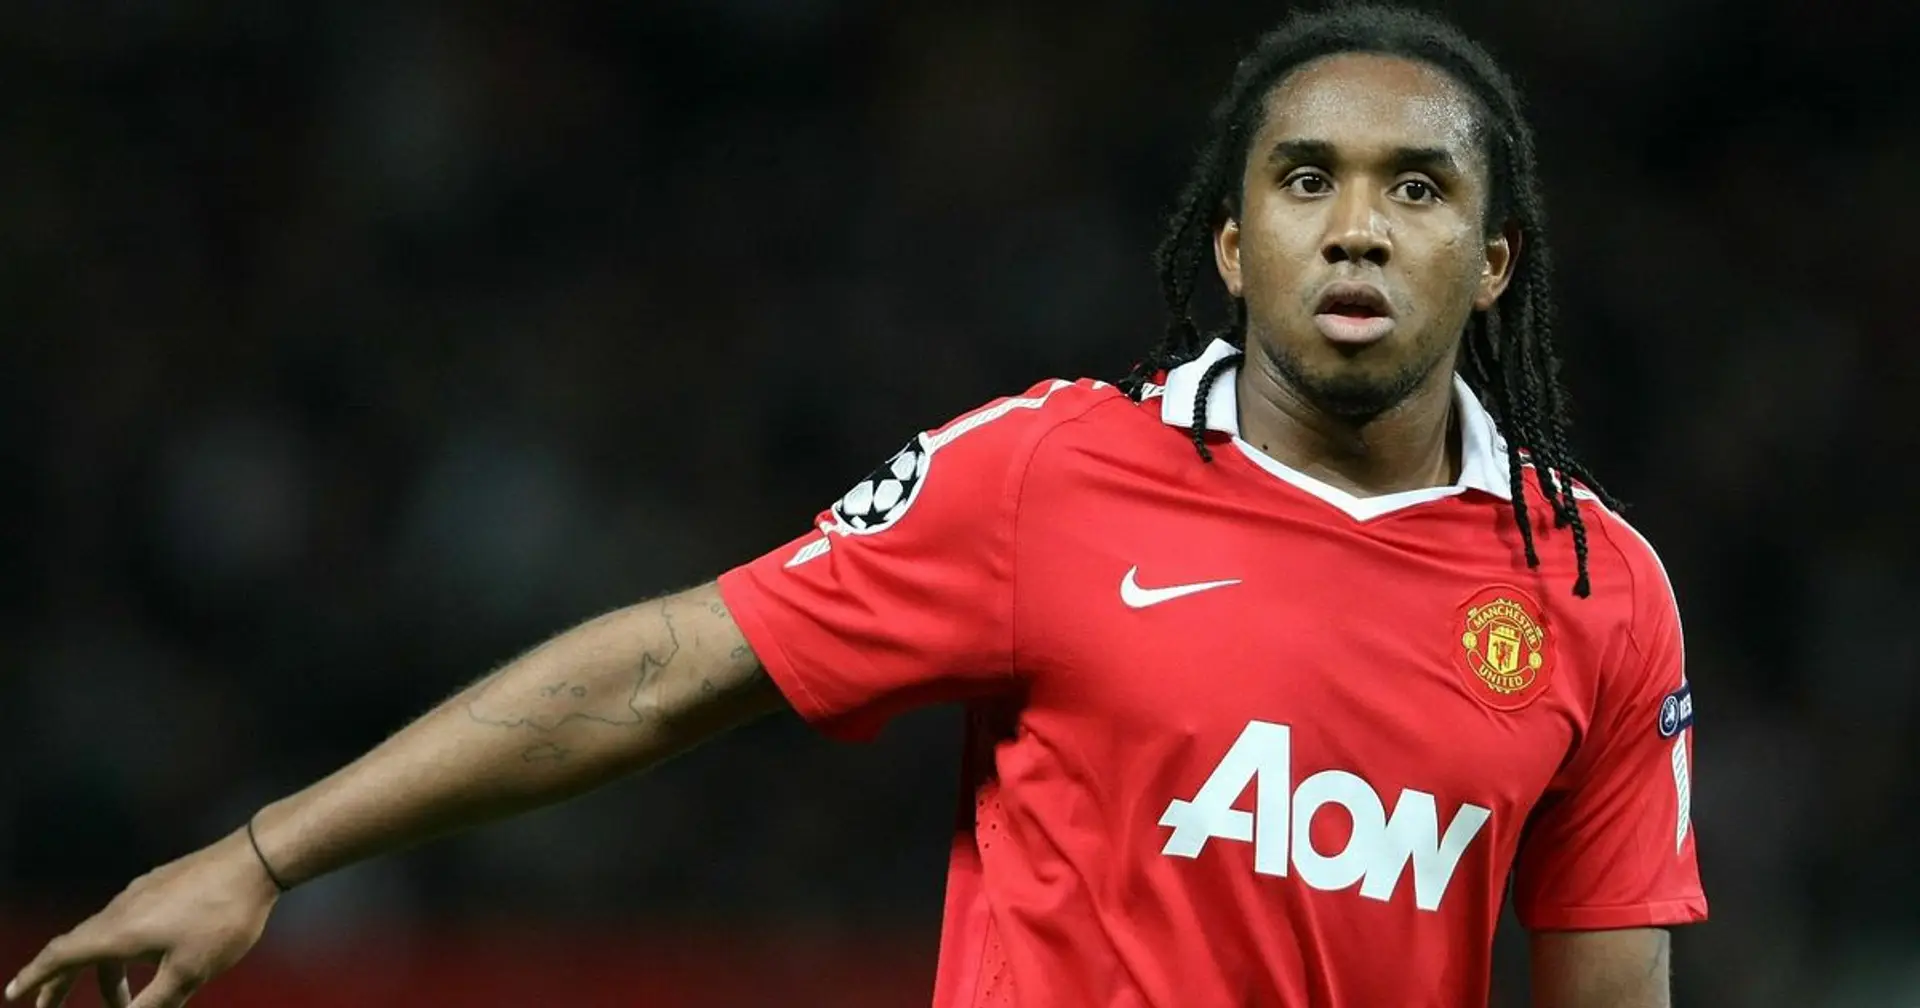 How did Anderson rise from FC Porto prospect to United’s cult hero? You asked, we answered